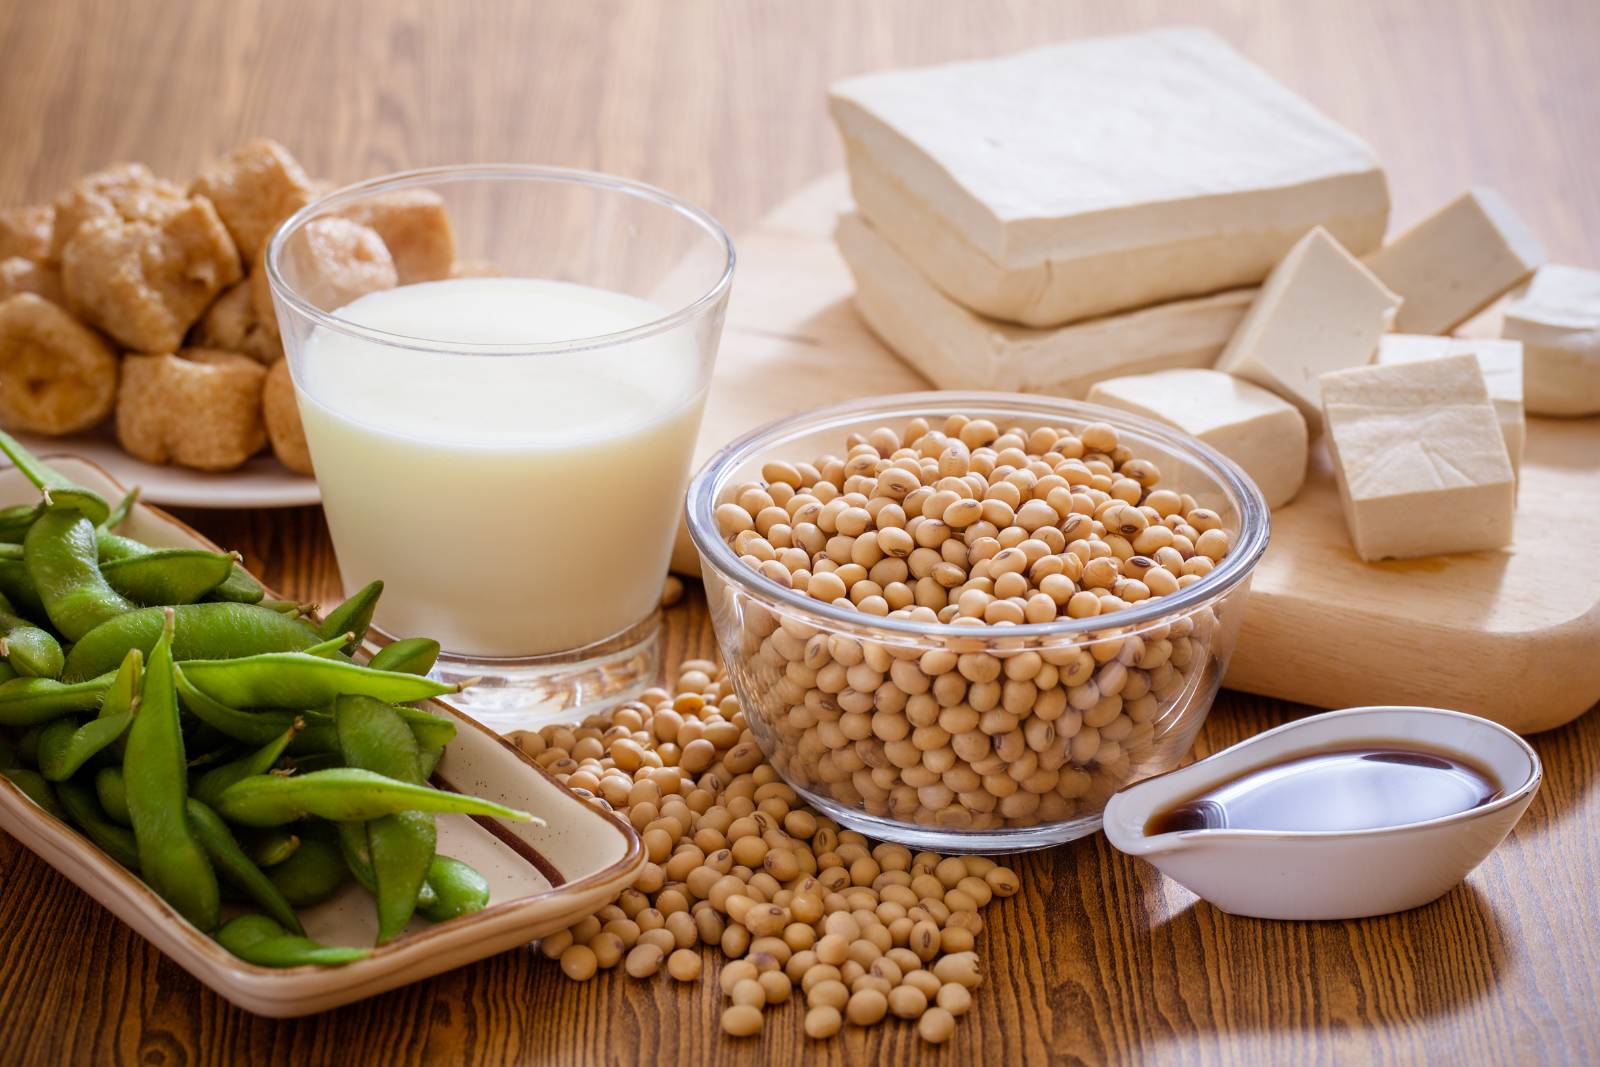 The Skinny on Soybean Allergies: What the Food Industry Needs to Know